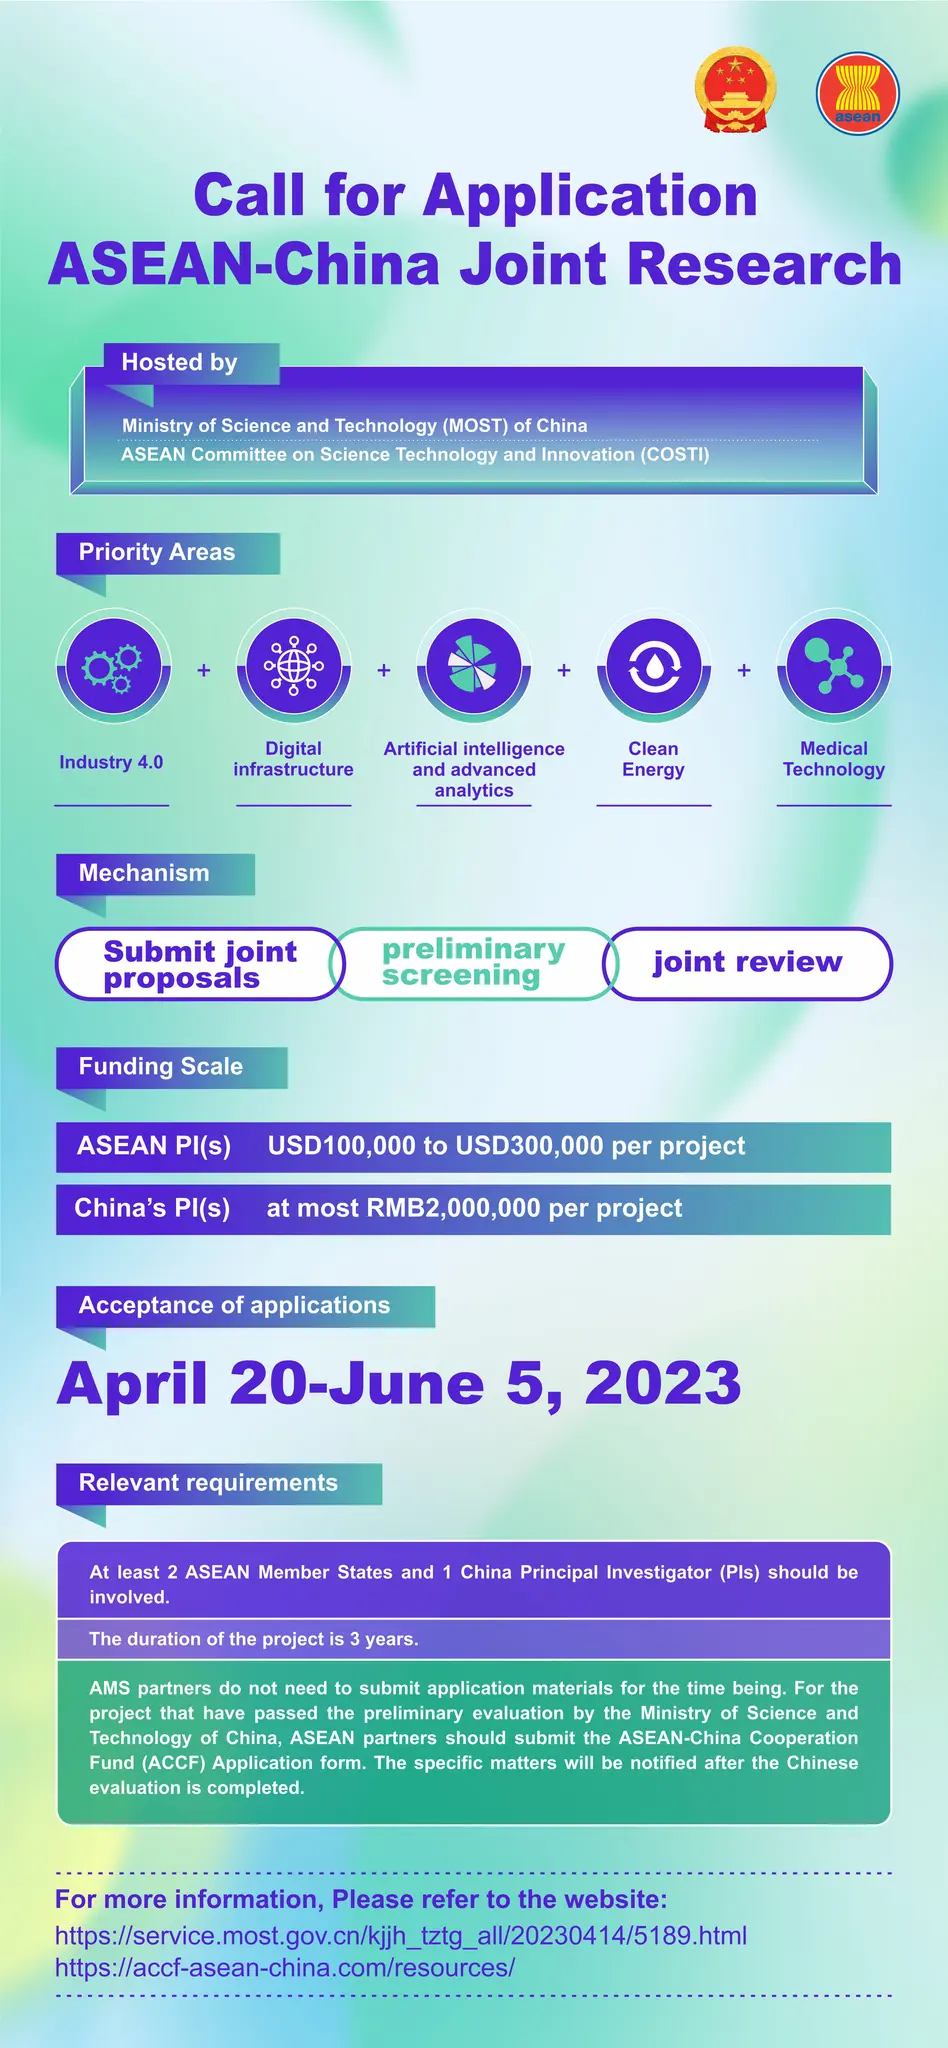 ASEAN-China Joint Research Call for Application